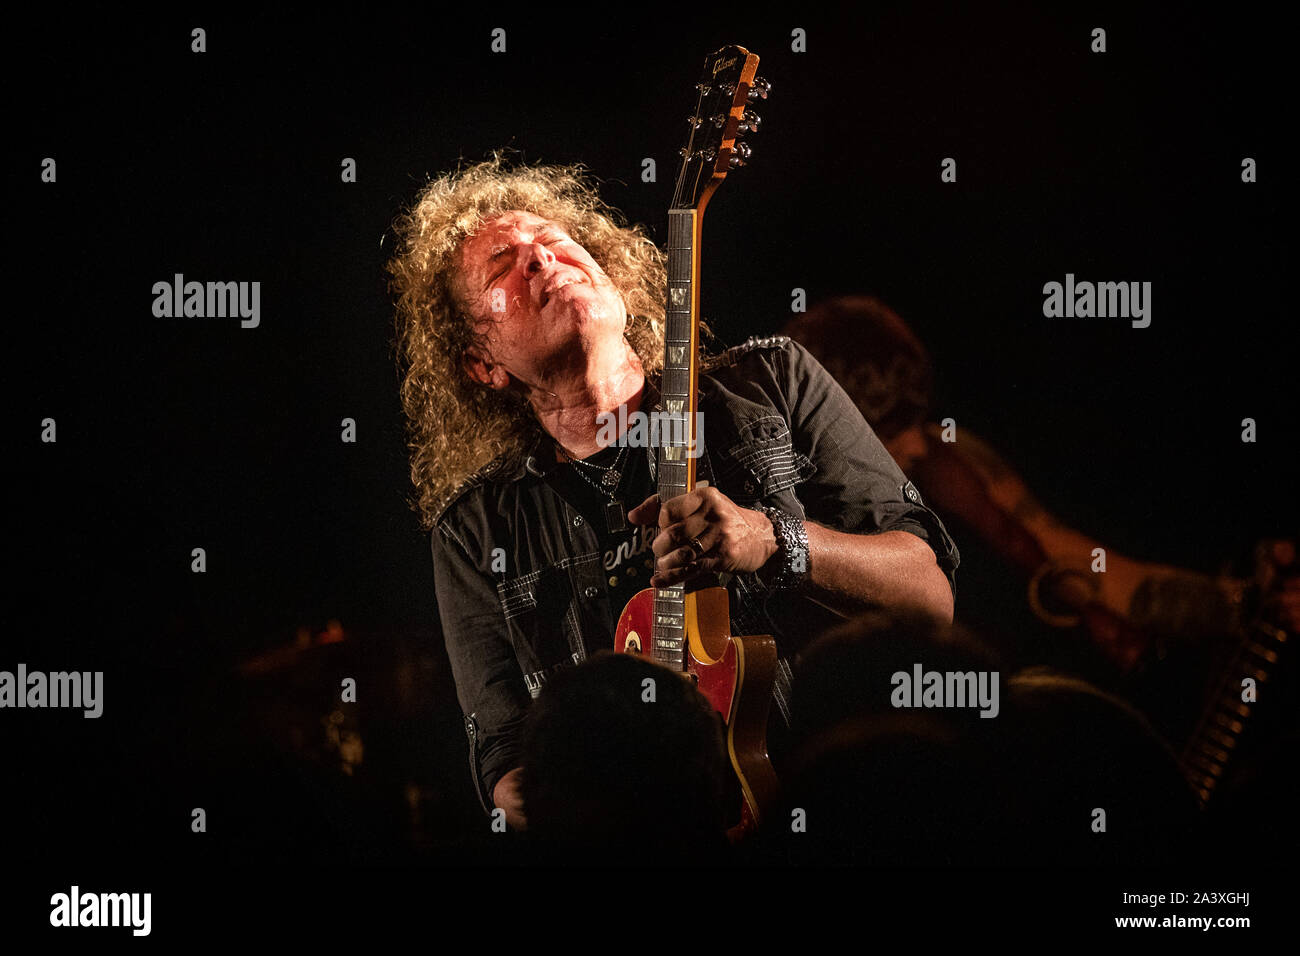 Oslo, Norway. 09th, October 2019. The American hard rock band Y&T performs a live concert at John Dee in Oslo. Here guitarist and singer Dave Meniketti is seen live on stage. (Photo credit: Gonzales Photo - Terje Dokken). Stock Photo